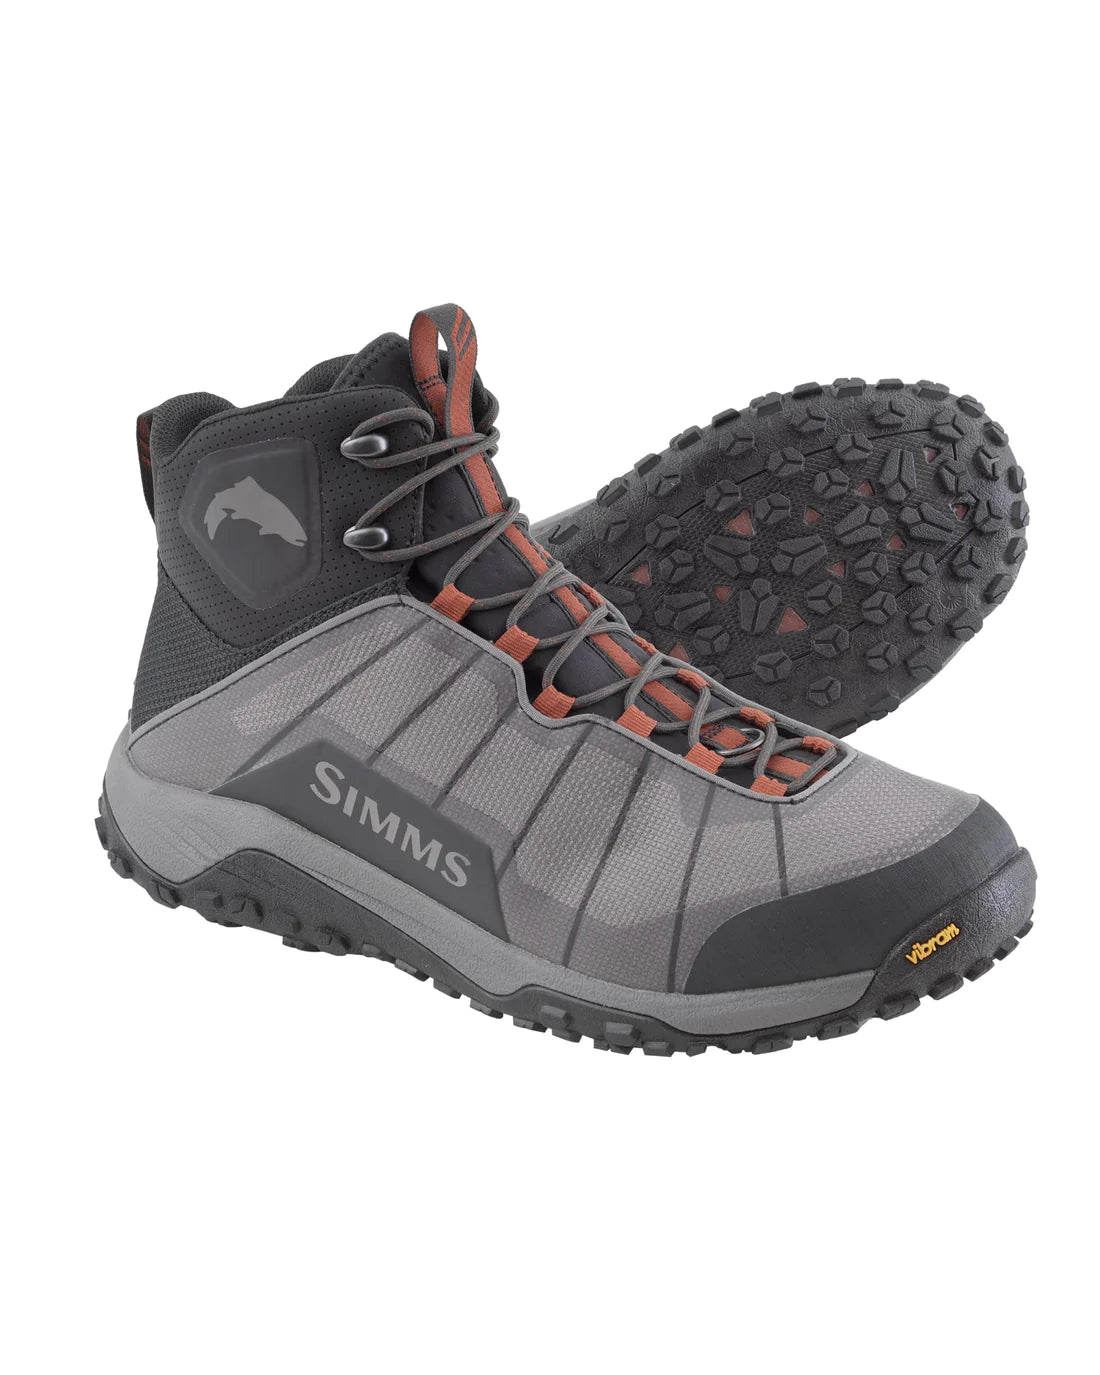 Simms Flyweight Boot - 9 - Mansfield Hunting & Fishing - Products to prepare for Corona Virus